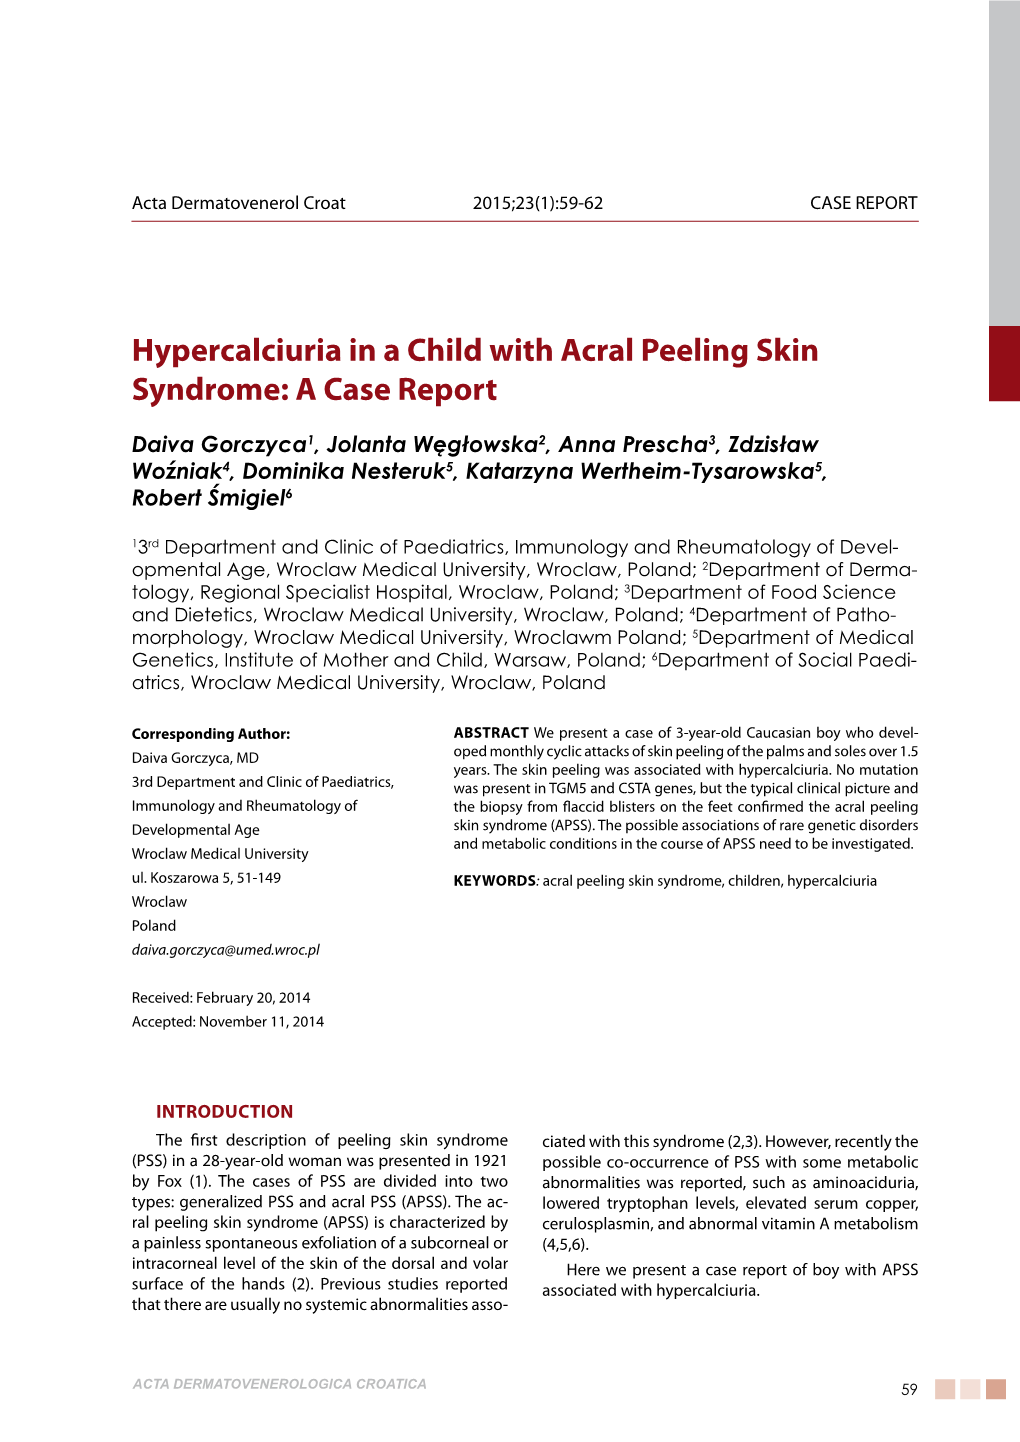 Hypercalciuria in a Child with Acral Peeling Skin Syndrome: a Case Report